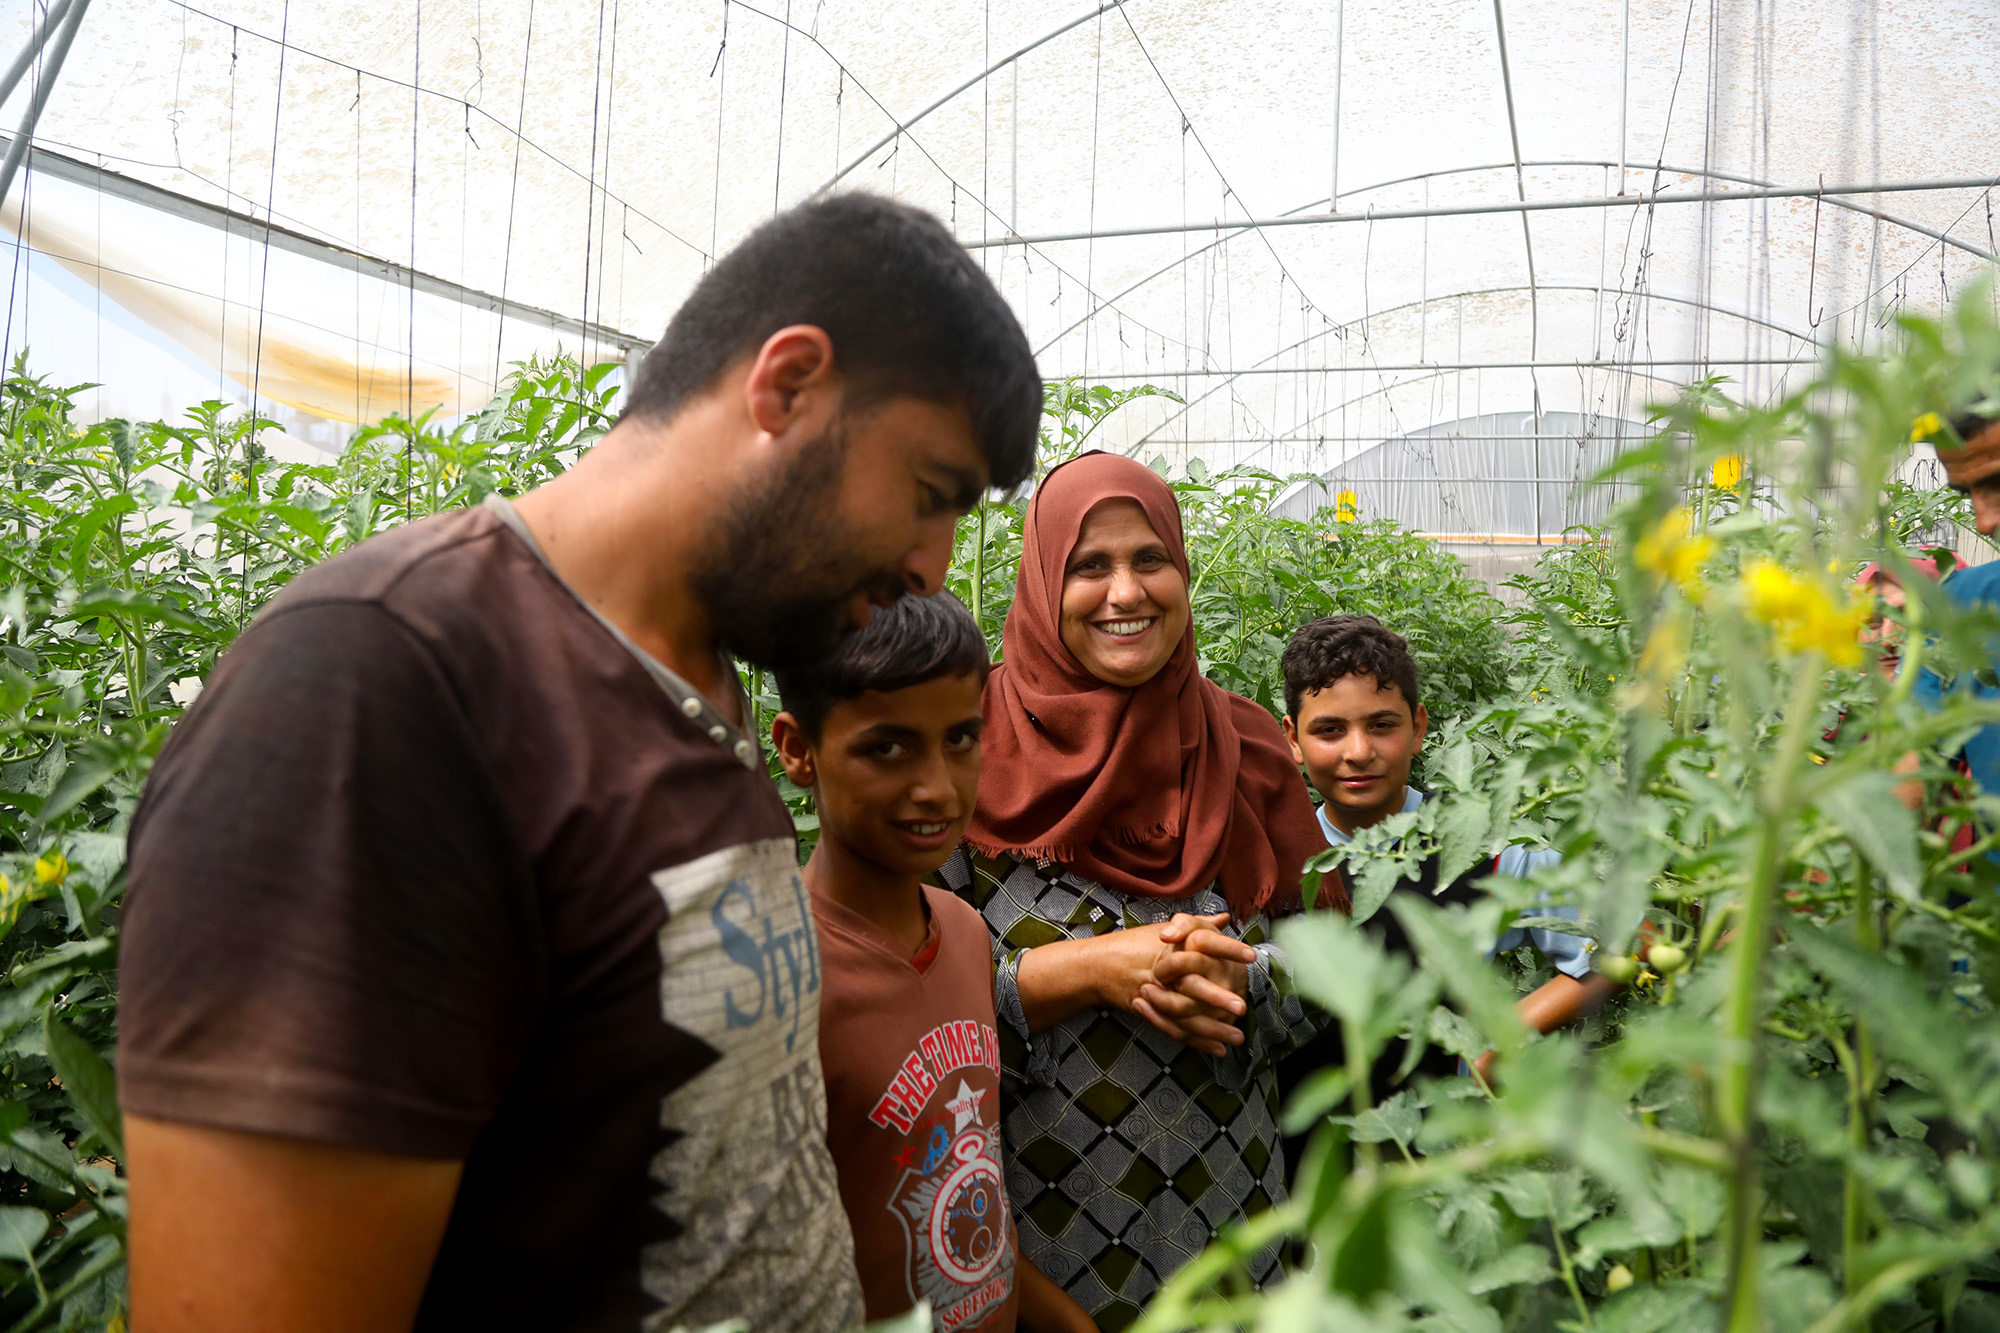 Fayrooz gives the camera a smile while showing off some of her produce in her Anera-built greenhouse.